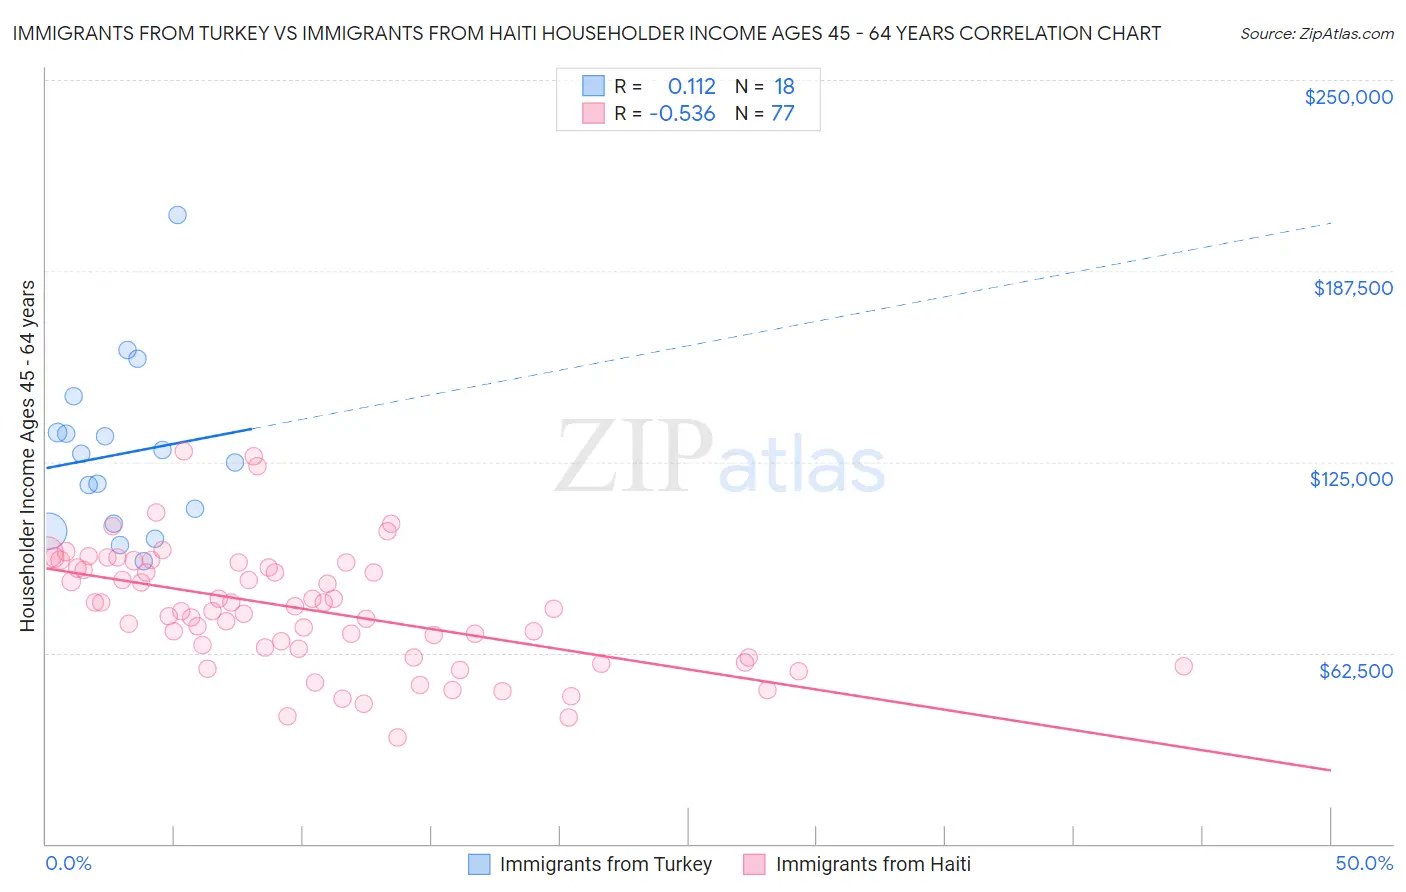 Immigrants from Turkey vs Immigrants from Haiti Householder Income Ages 45 - 64 years